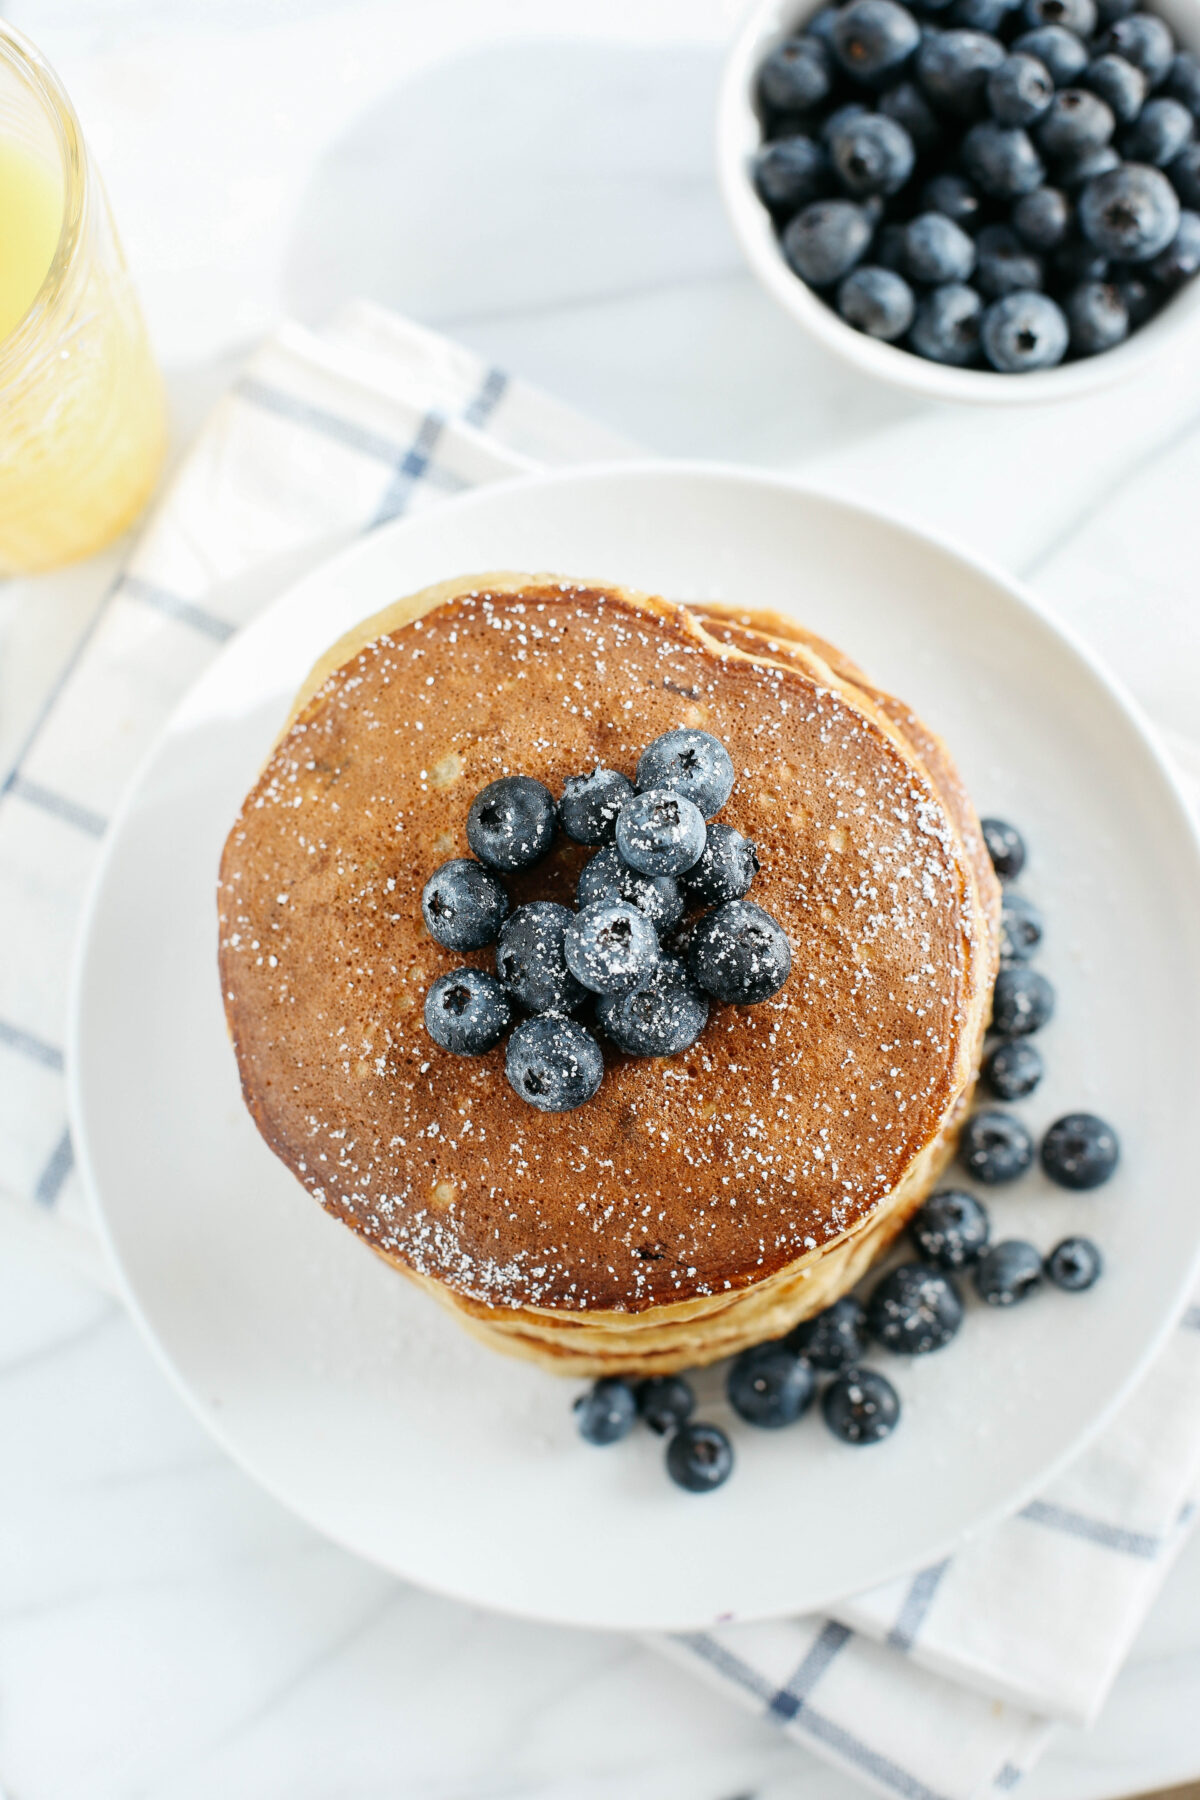 Start your morning with these fluffy blueberry banana pancakes that are grain-free, gluten-free and refined sugar-free made with almond flour for an easy delicious breakfast!